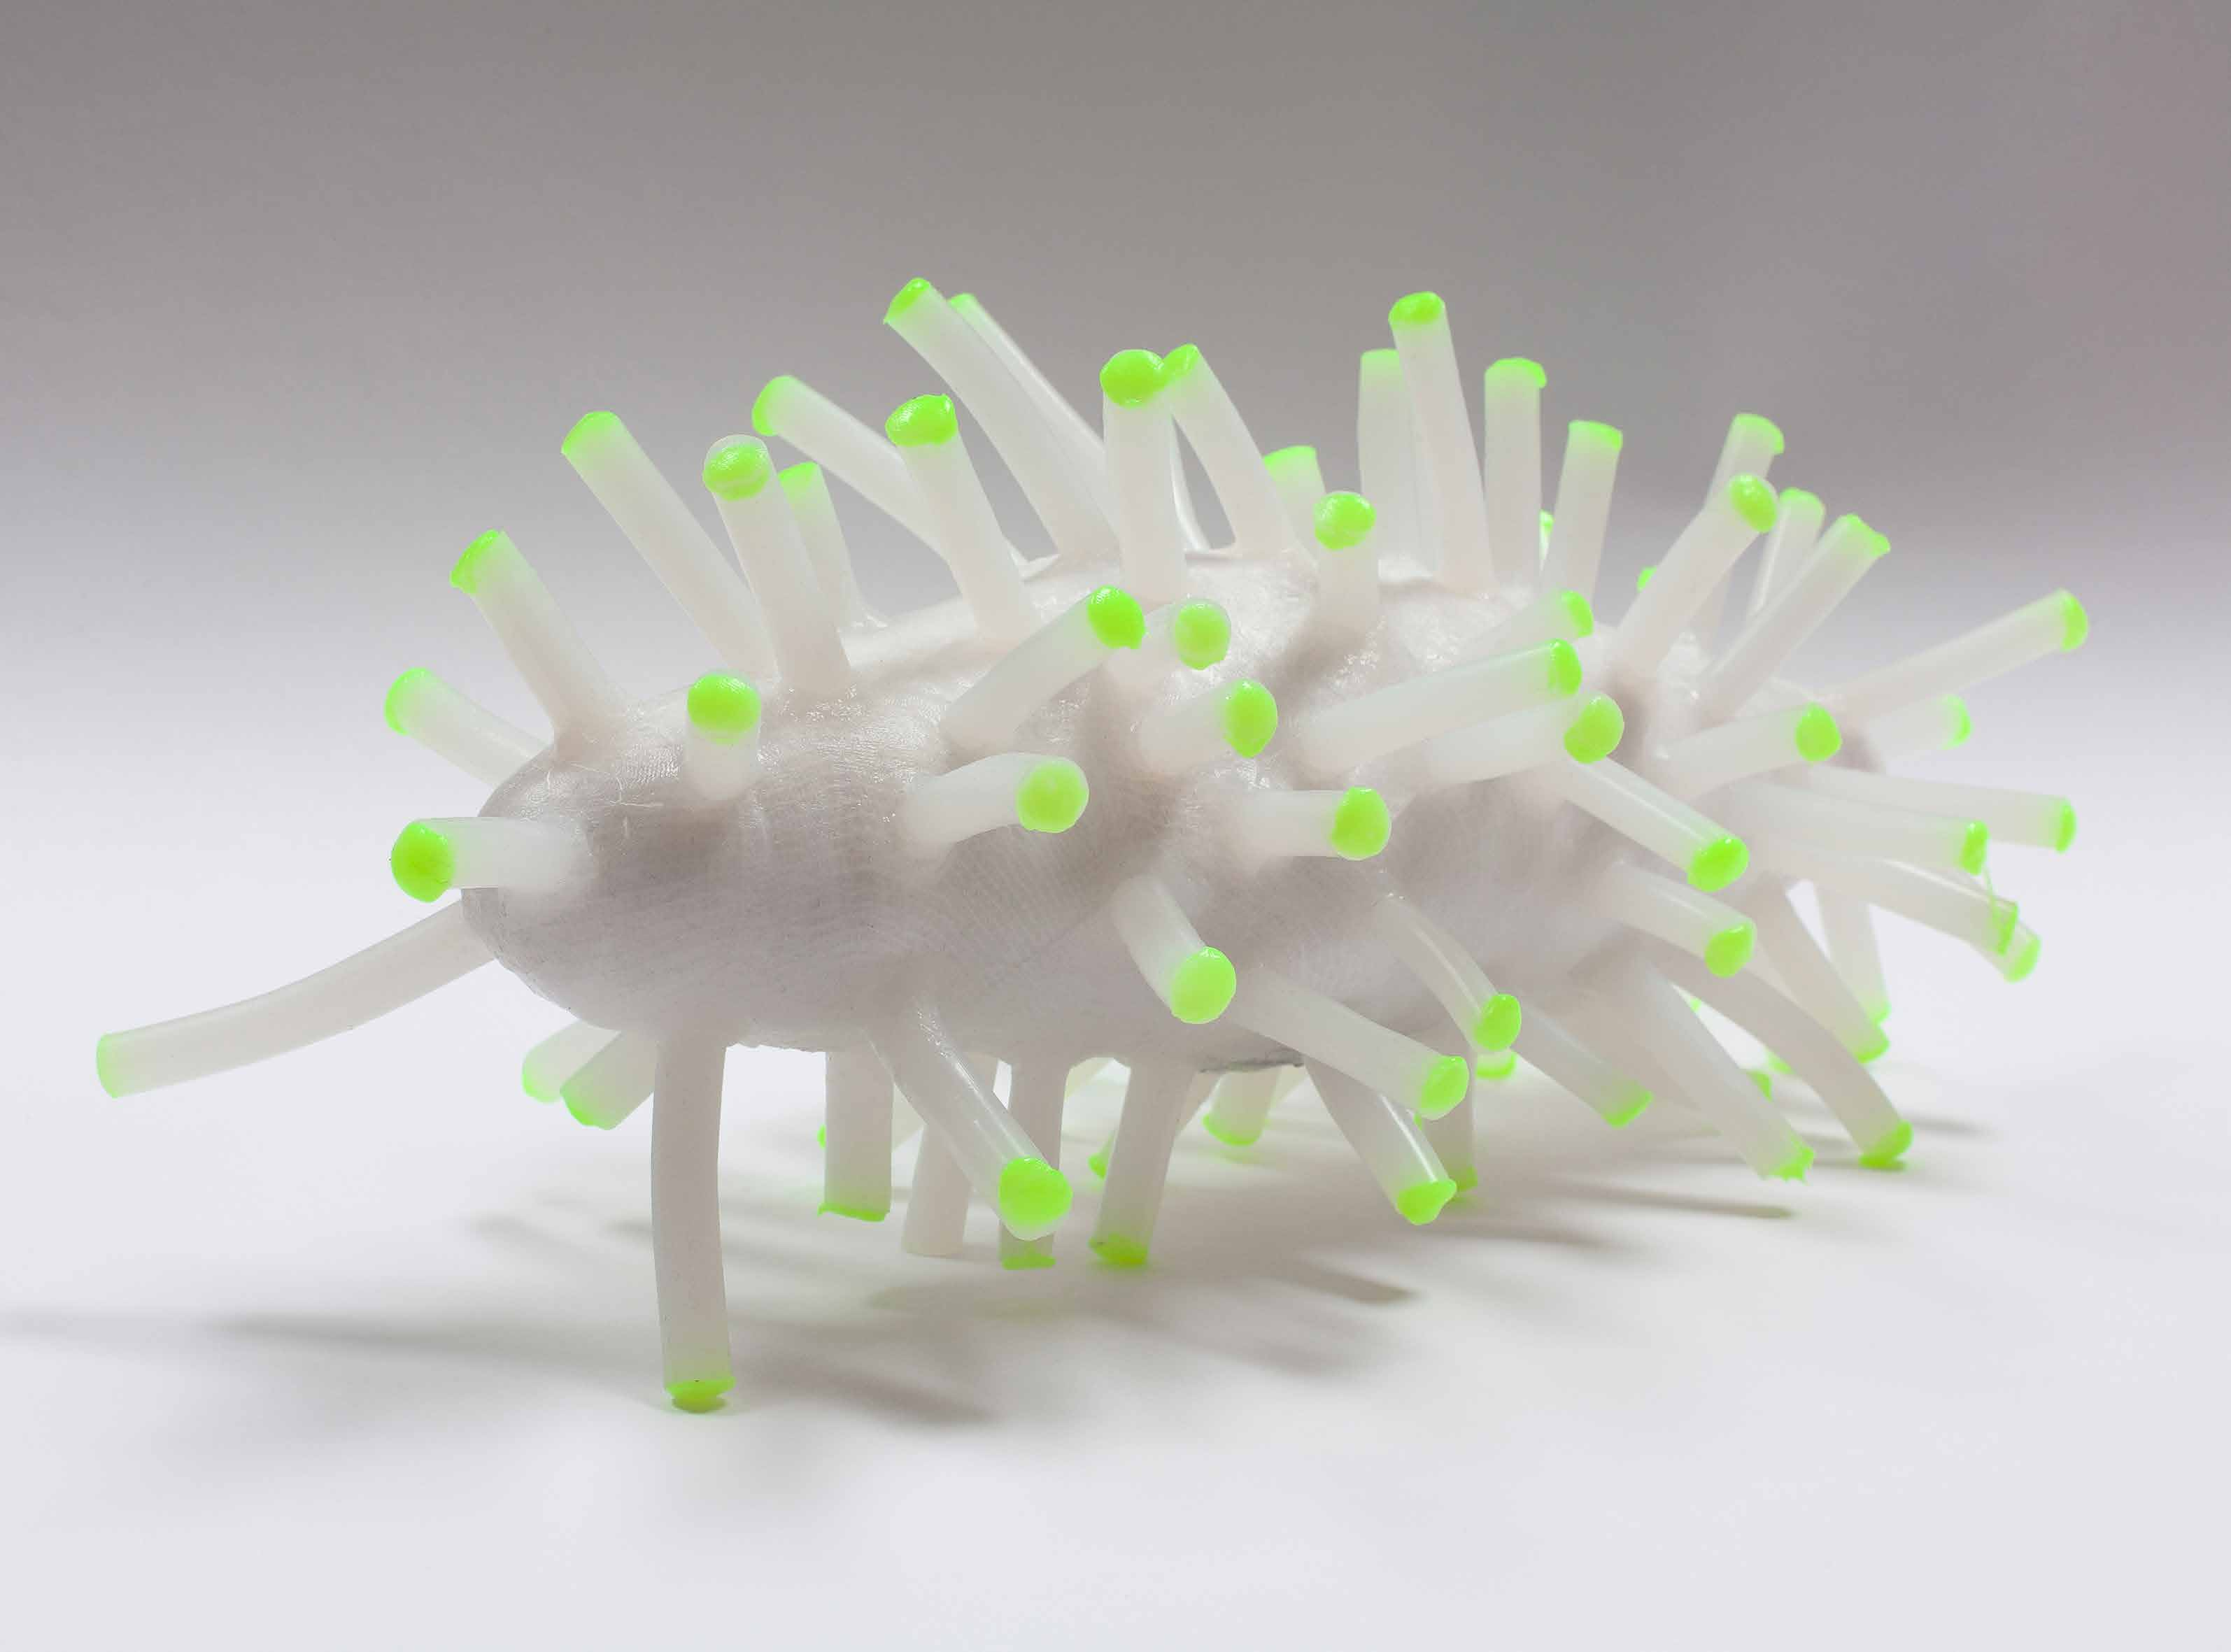 14 Lab Sweets (Small Beasts #1) 2014 Silikon, fluoreszierende